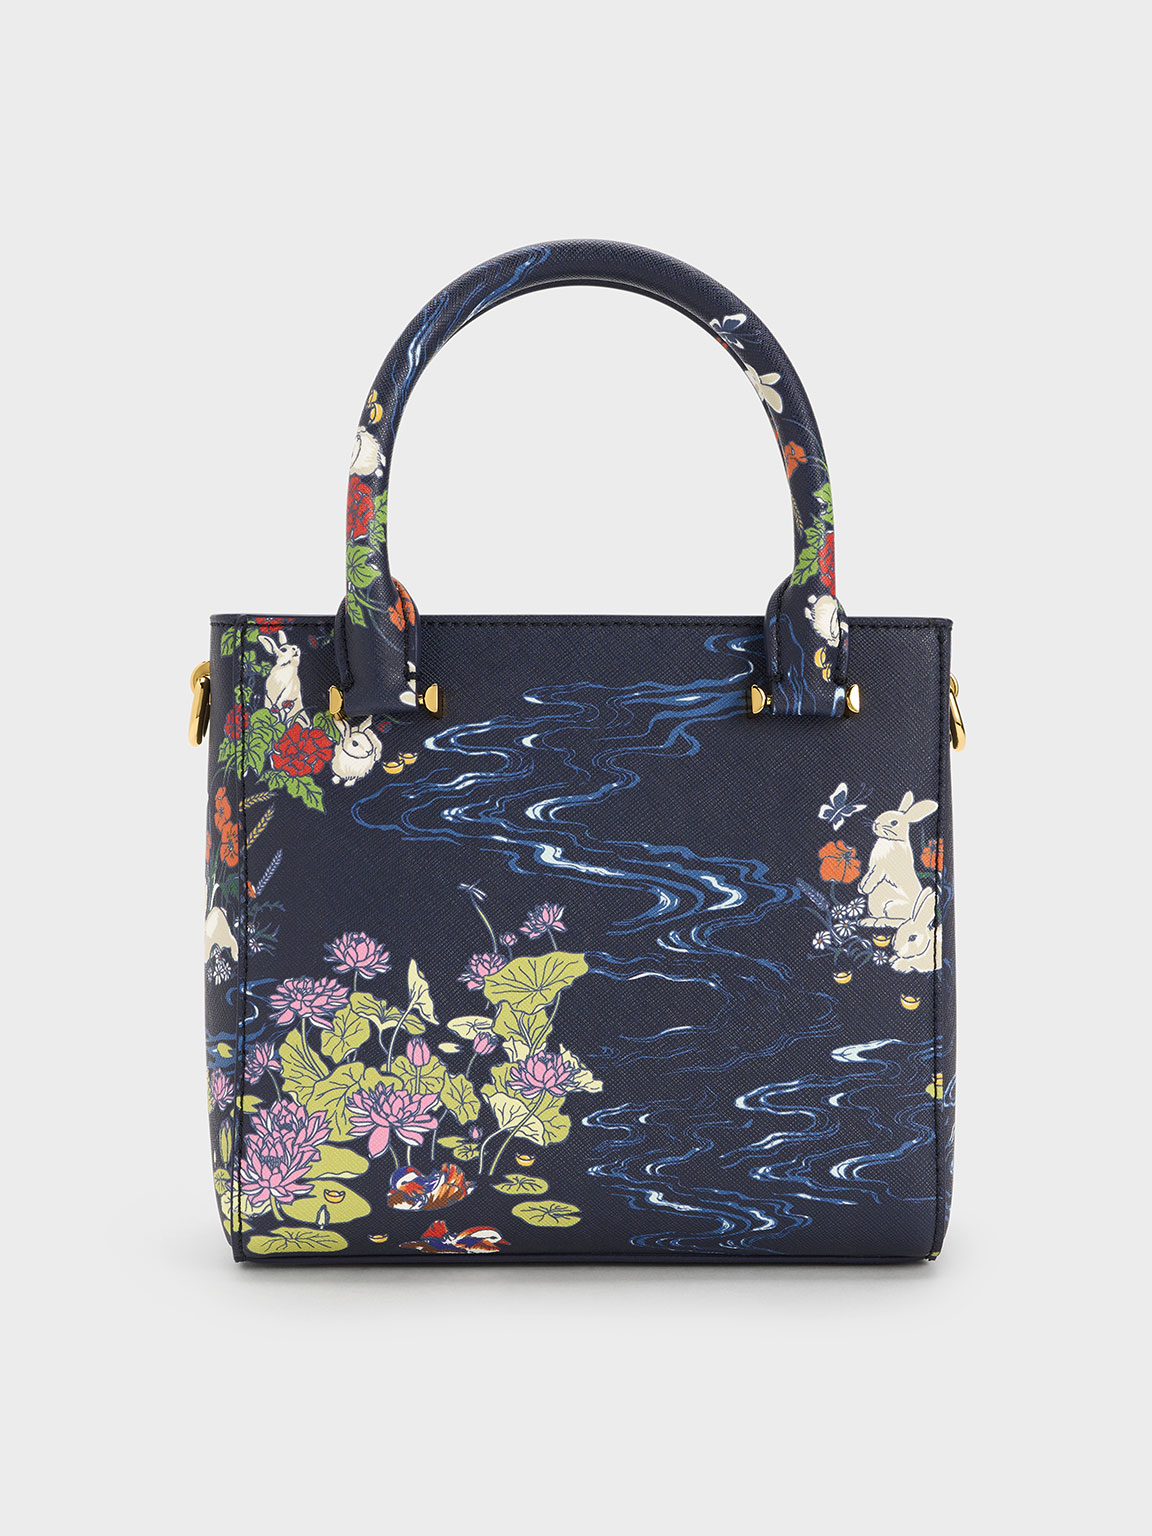 Navy Rabbit Illustrated Belted Bag - CHARLES & KEITH PH